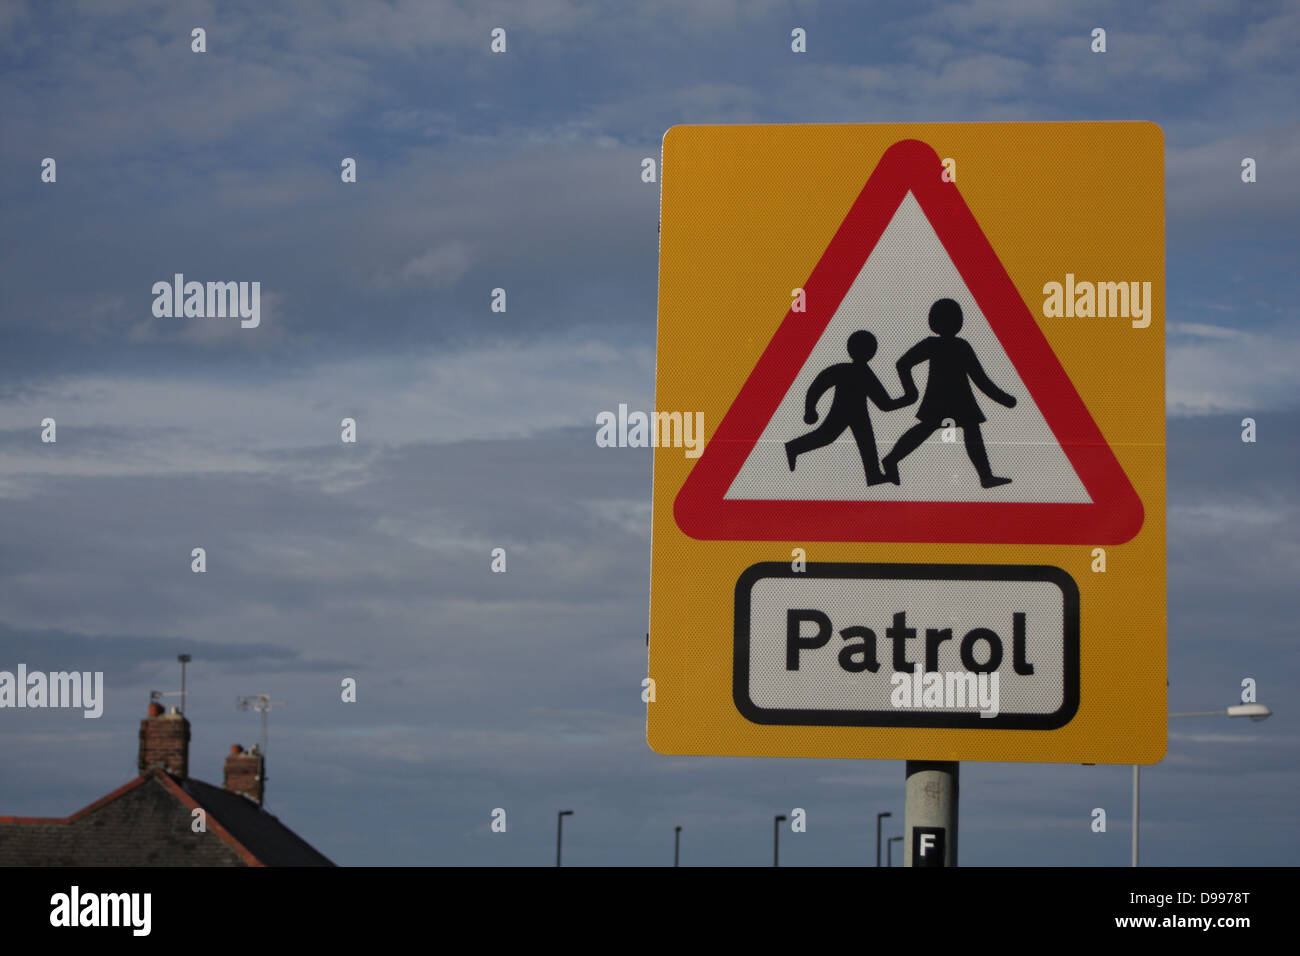 School Patrol - Road traffic sign, warns motorists about children coming and going to and from school. Landscape, to right. Stock Photo